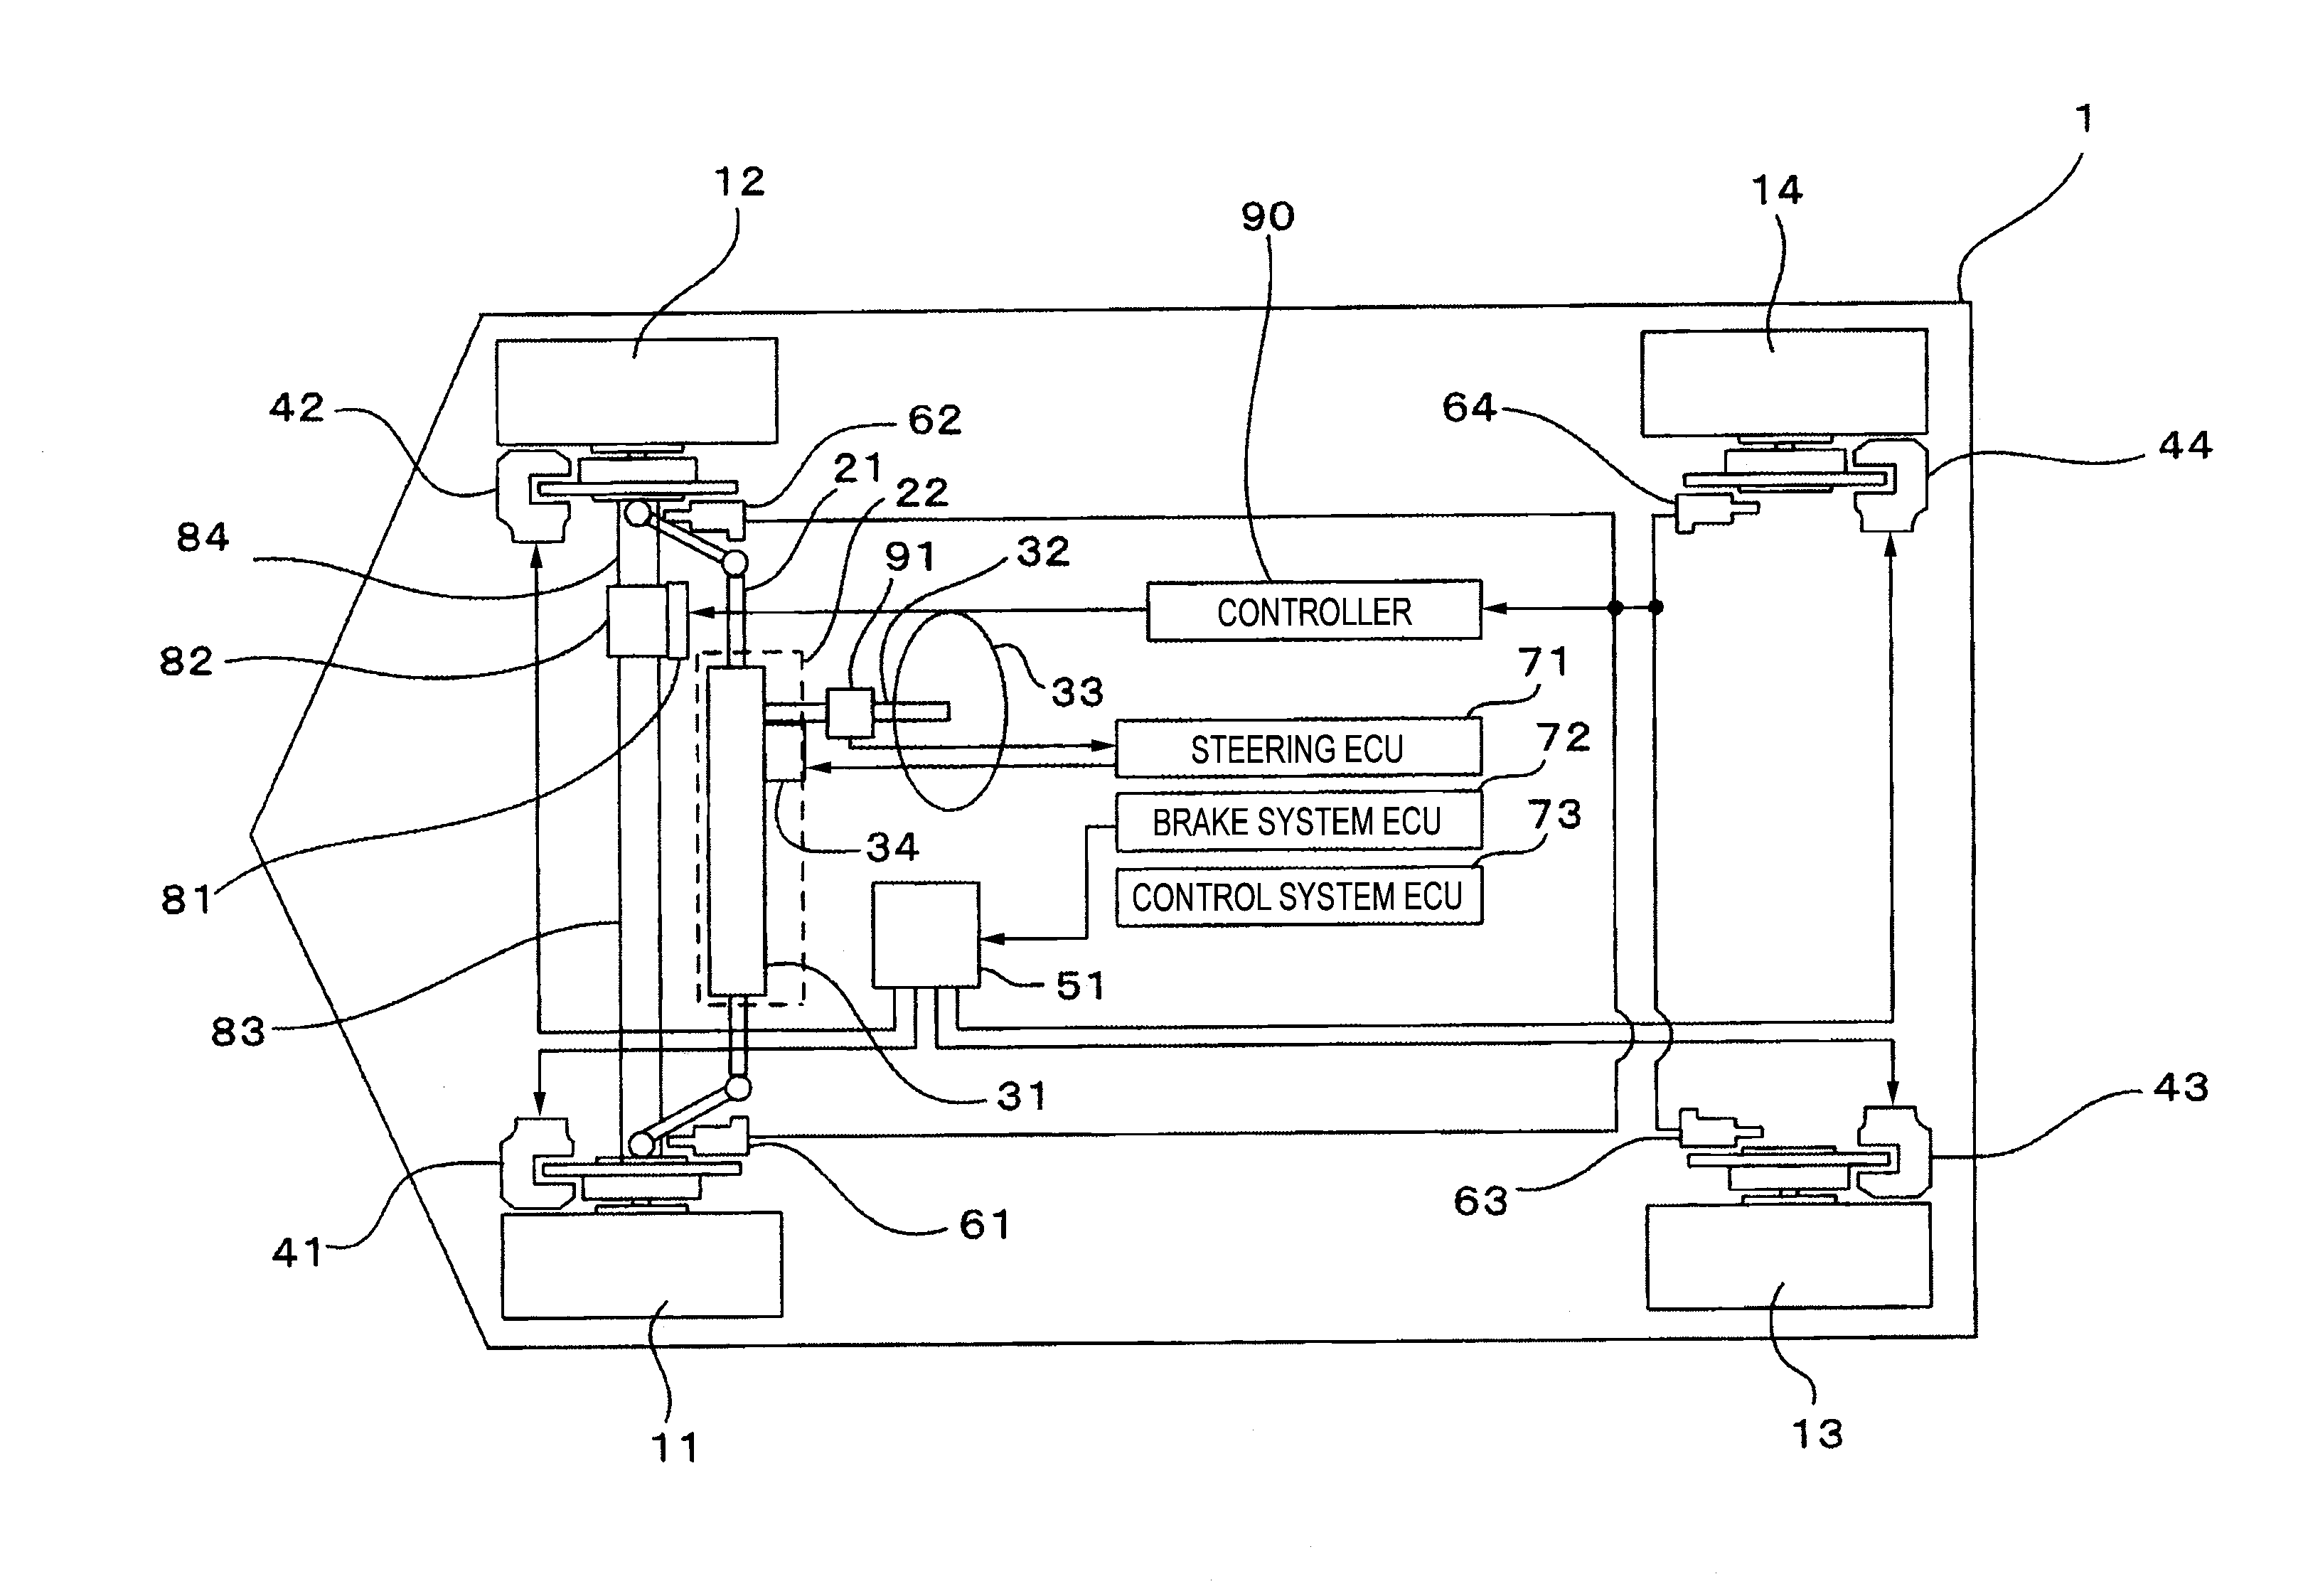 Vehicle integrated control apparatus